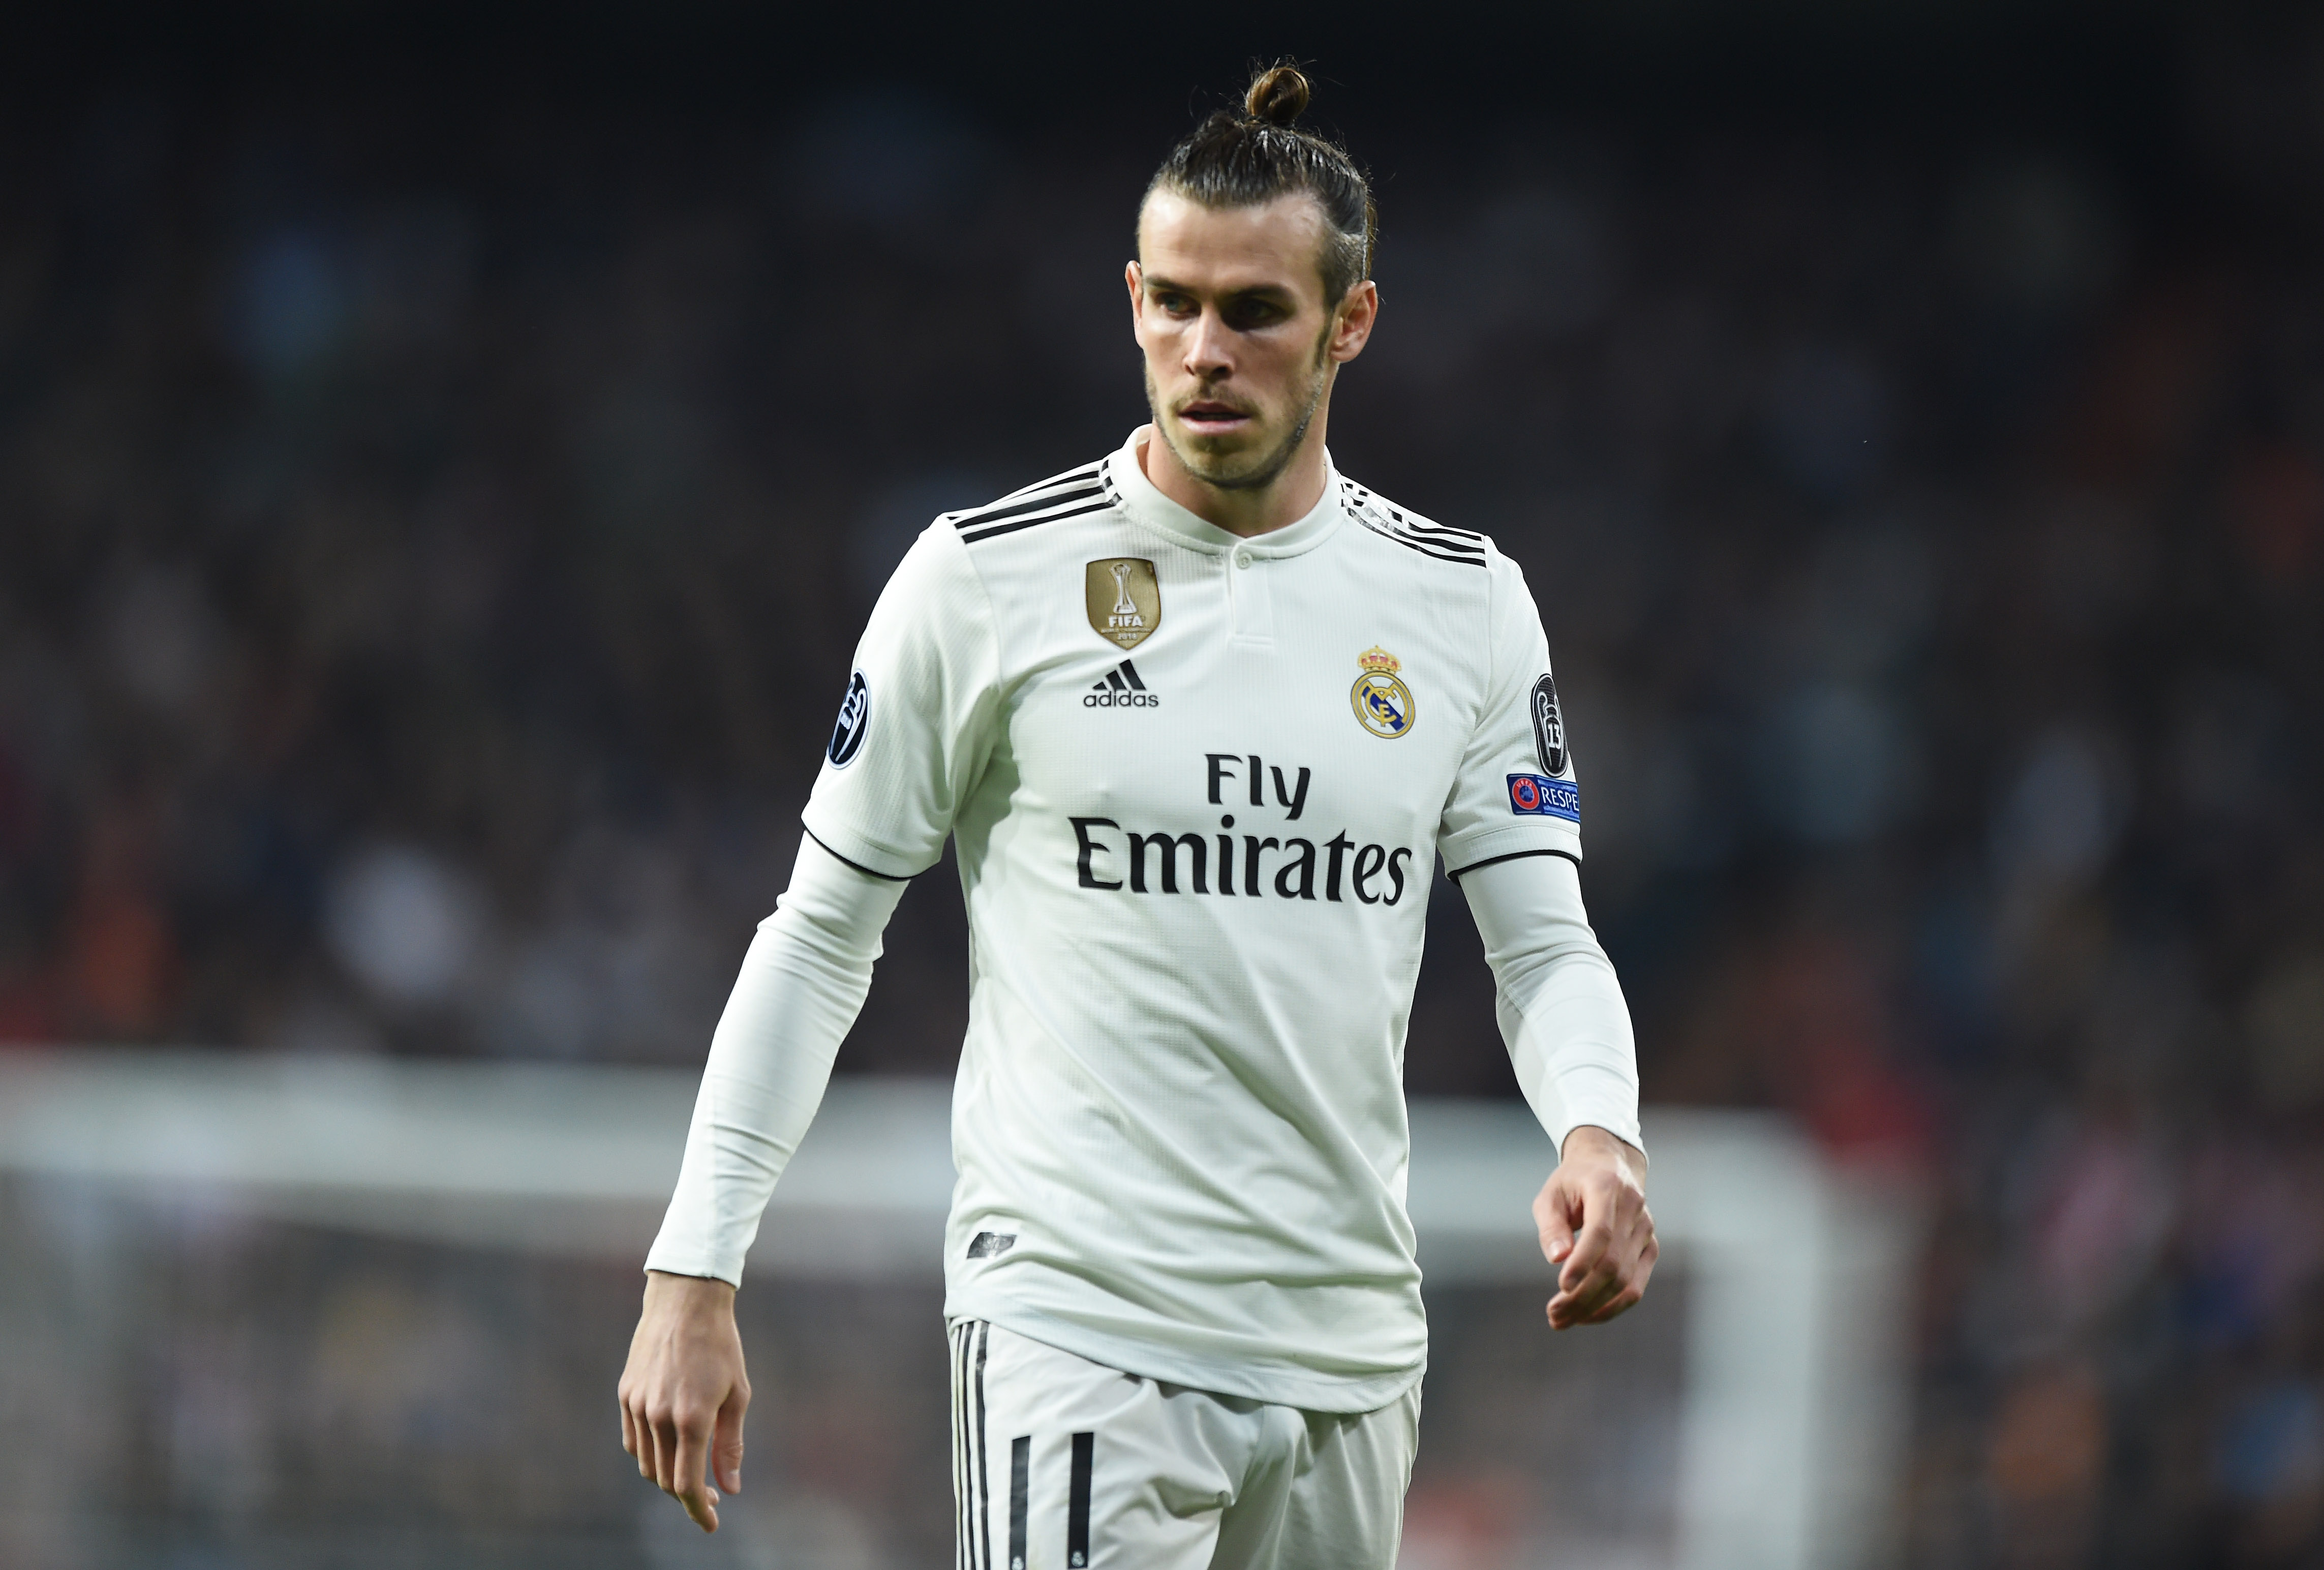 MADRID, SPAIN - MARCH 05:  Gareth Bale of Real Madrid looks on during the UEFA Champions League Round of 16 Second Leg match between Real Madrid and Ajax at Bernabeu on March 05, 2019 in Madrid, Spain. (Photo by Denis Doyle/Getty Images)